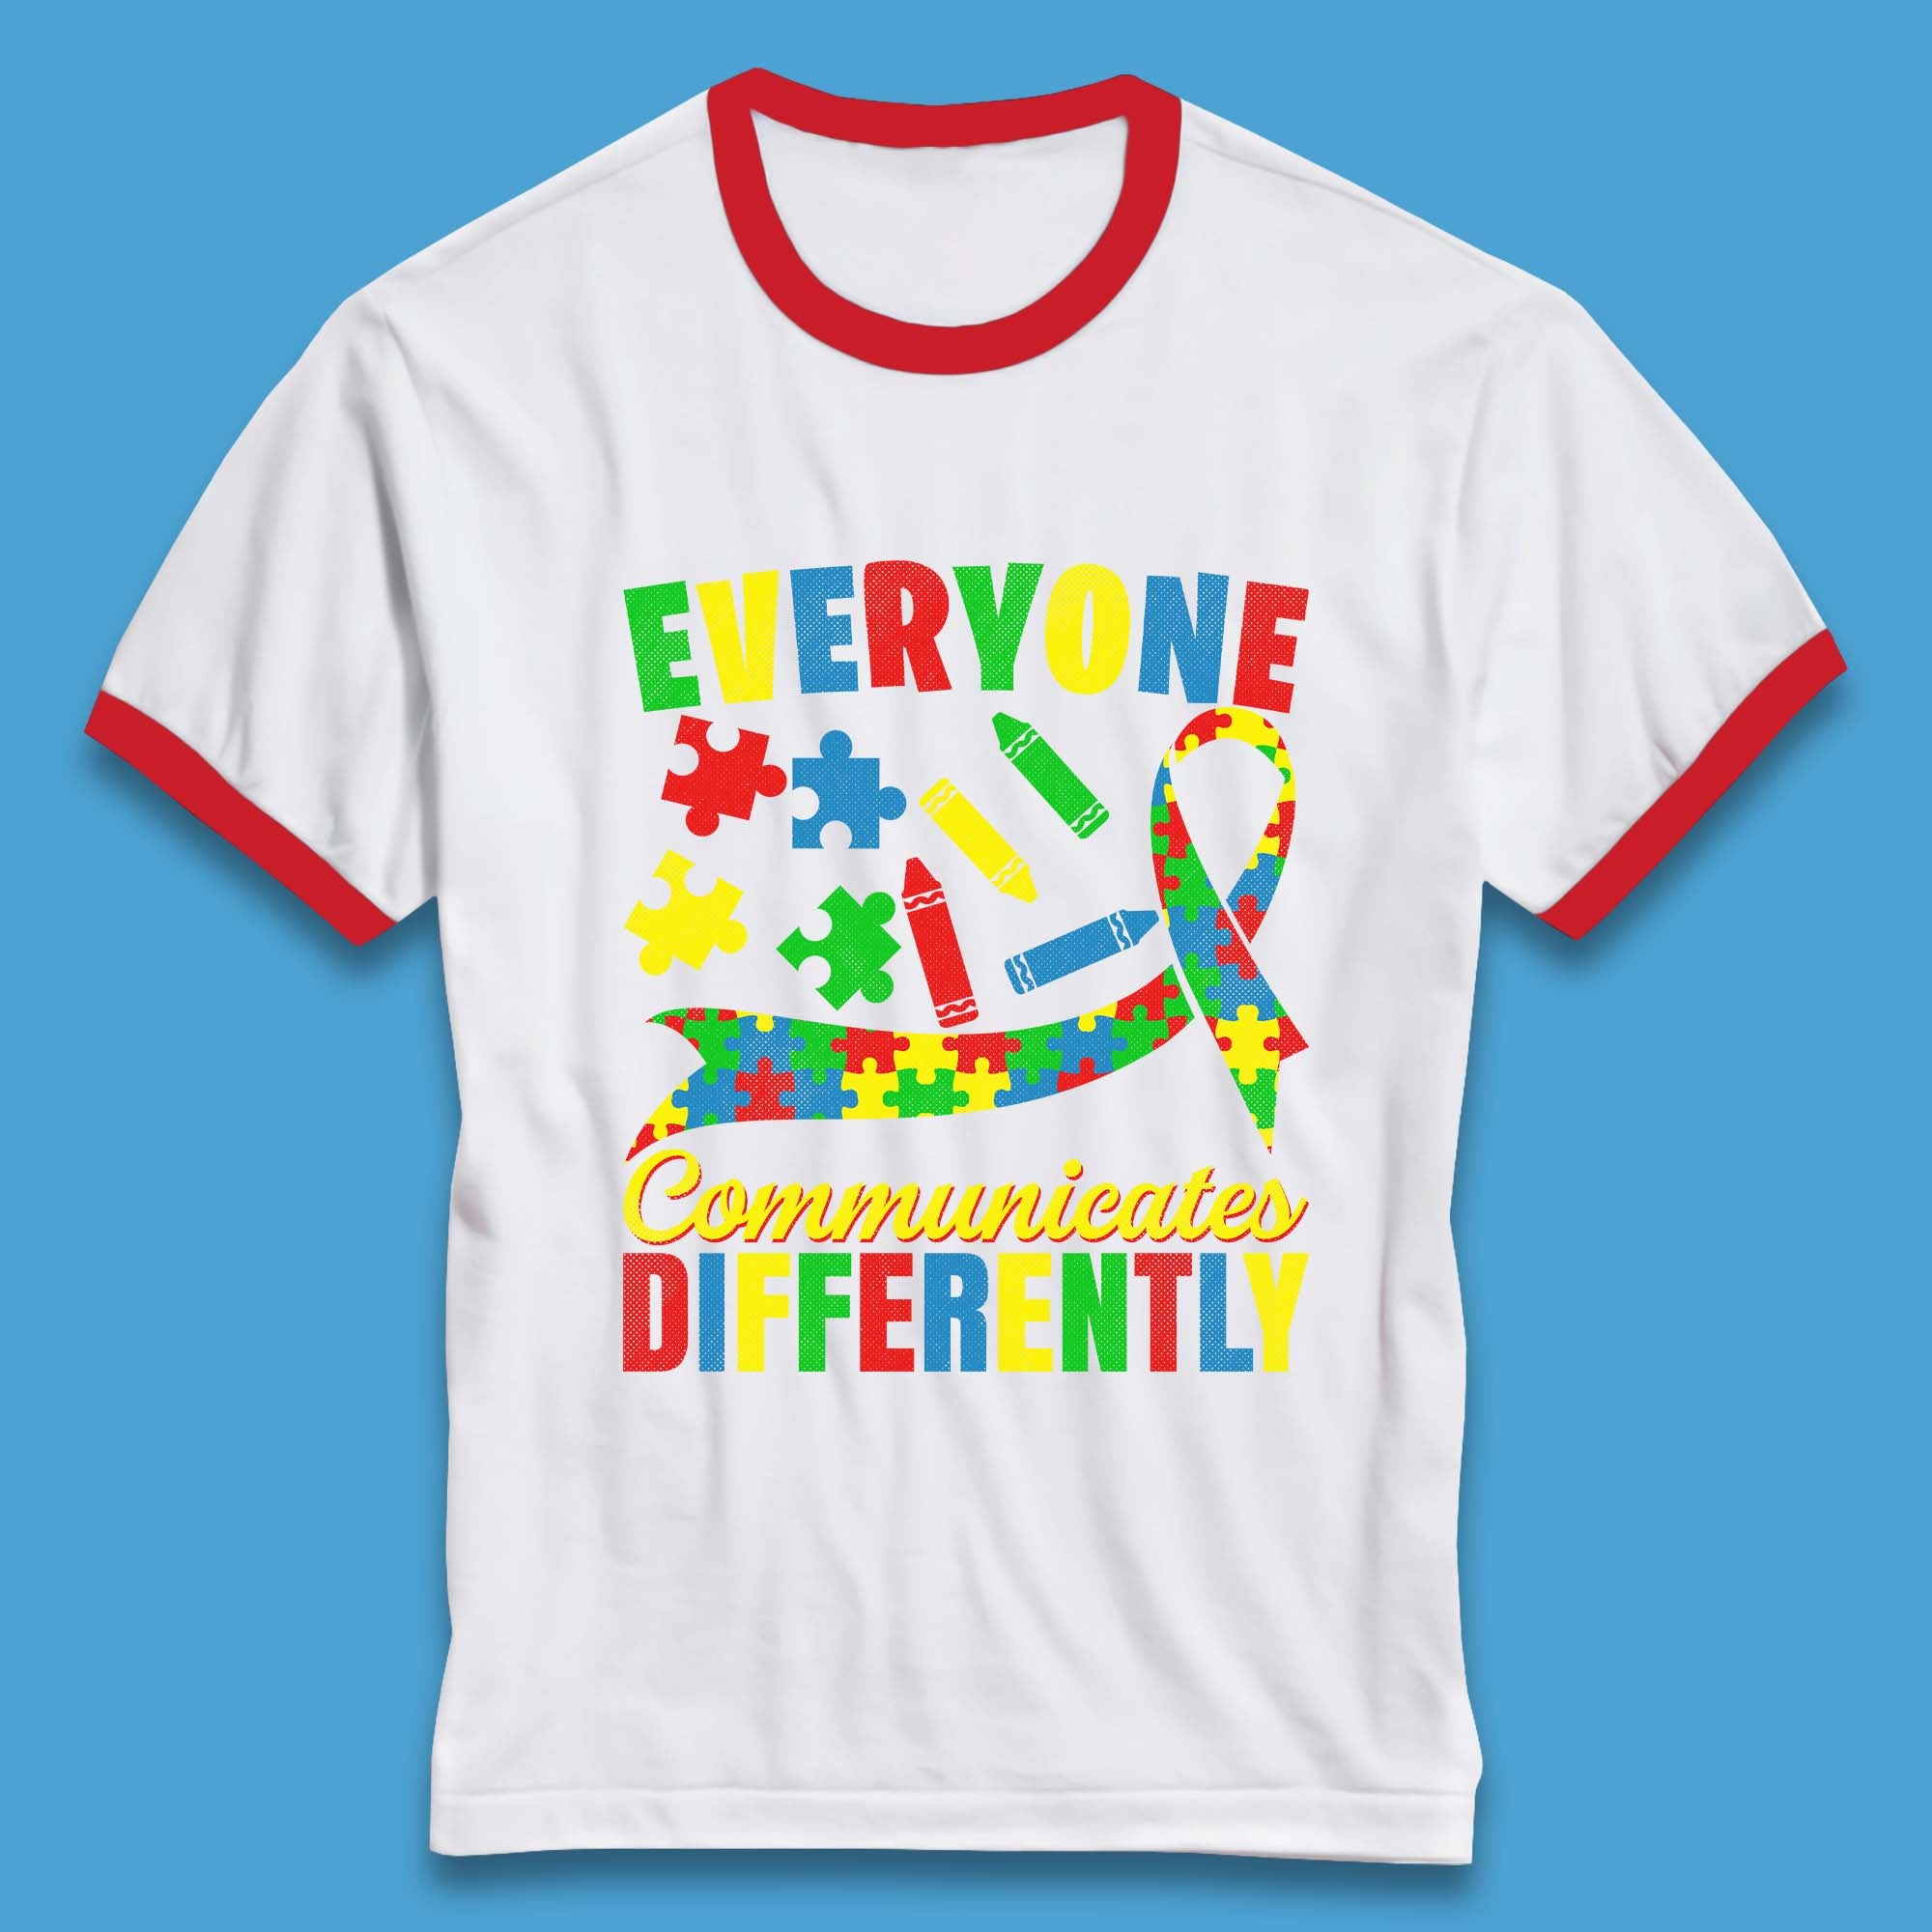 Everyone Communicates Differently Ringer T-Shirt